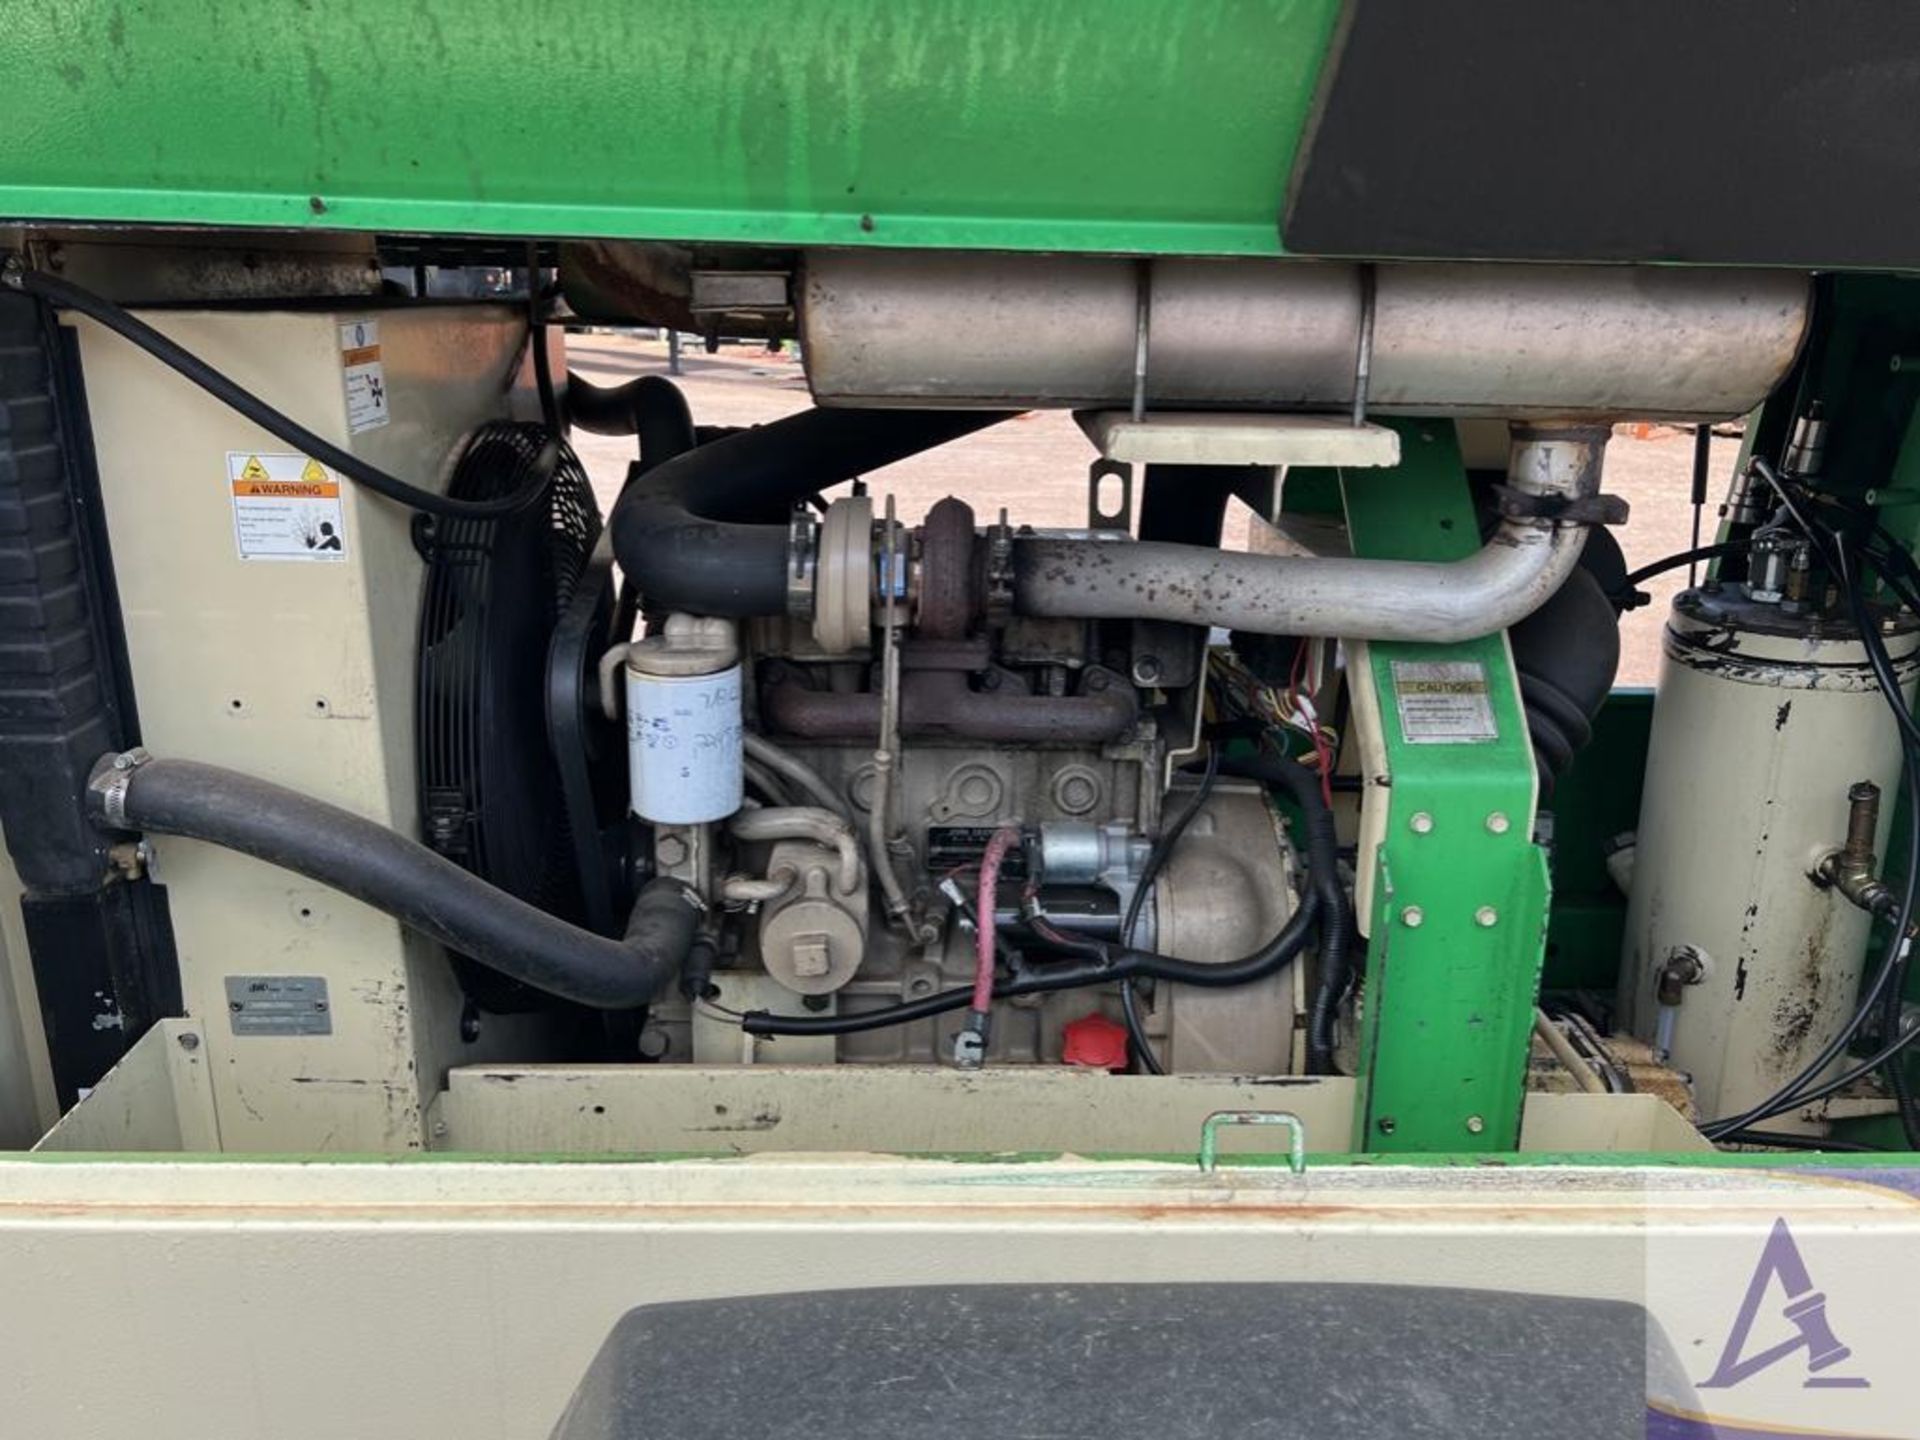 2007 Ingersoll Rand P185 Air Compressor - Image 12 of 17